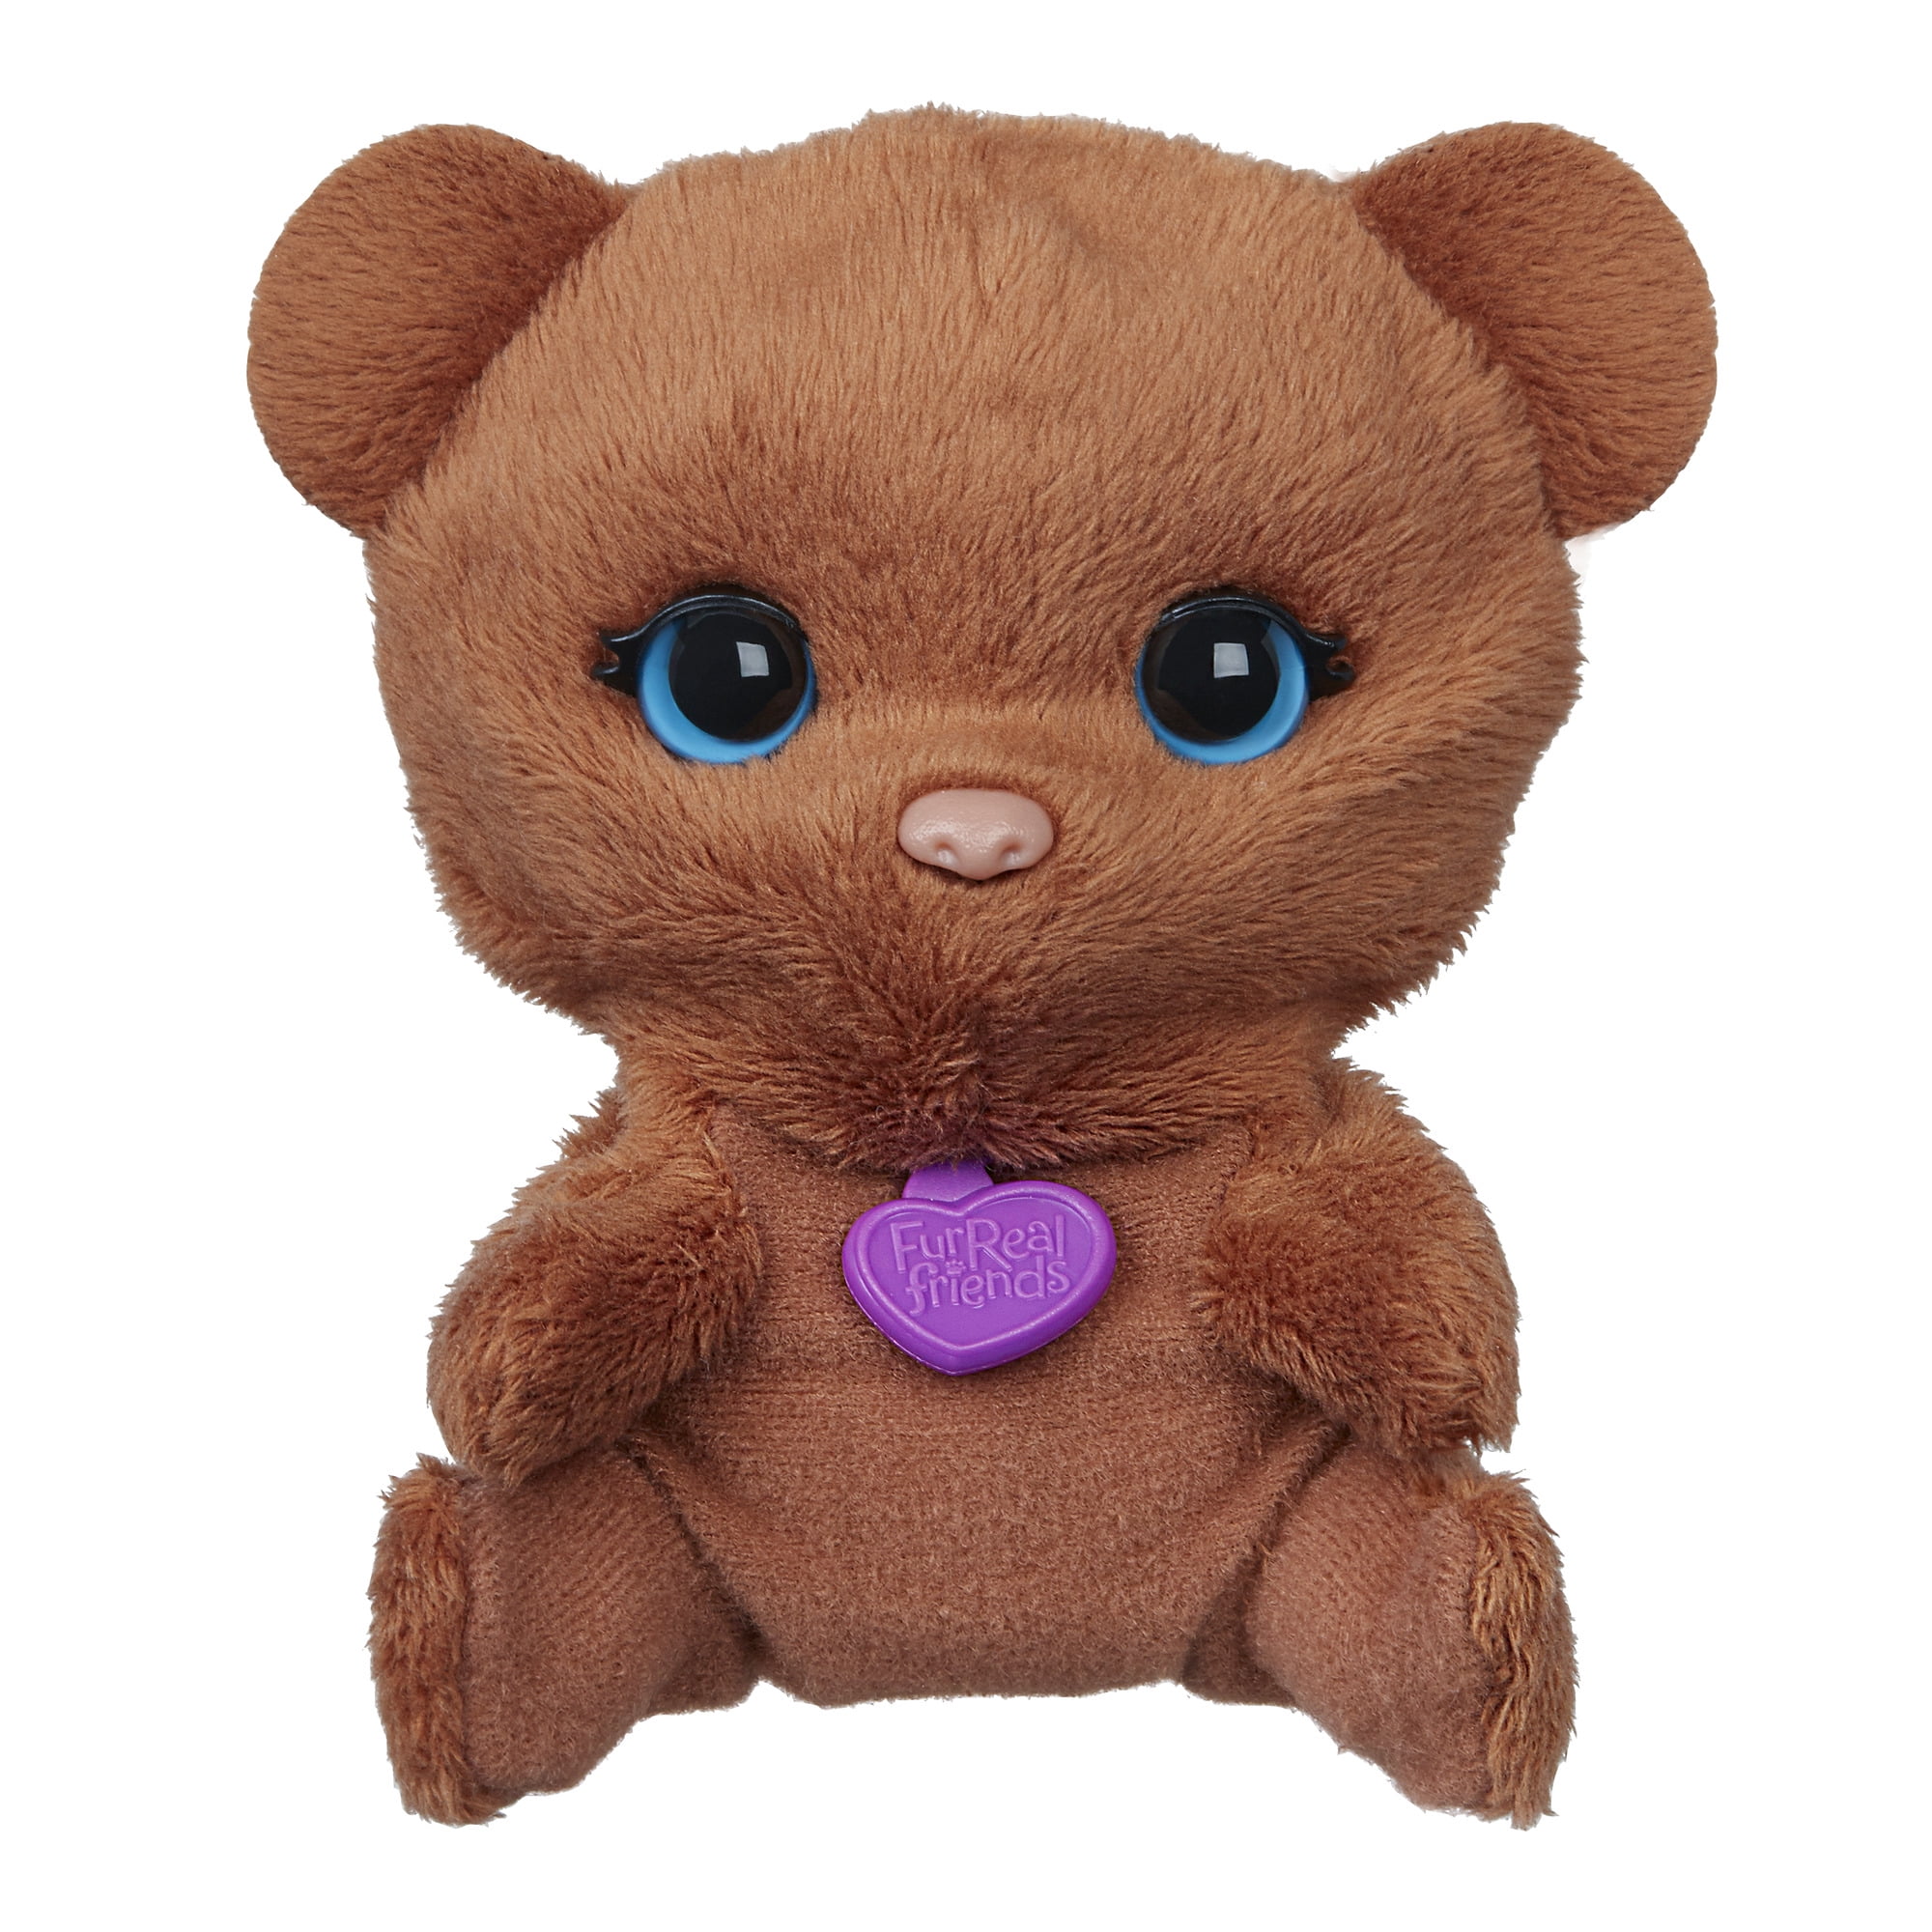 Brand New. Cubbies Toy ‘Cubbford’ The Brown Bear 